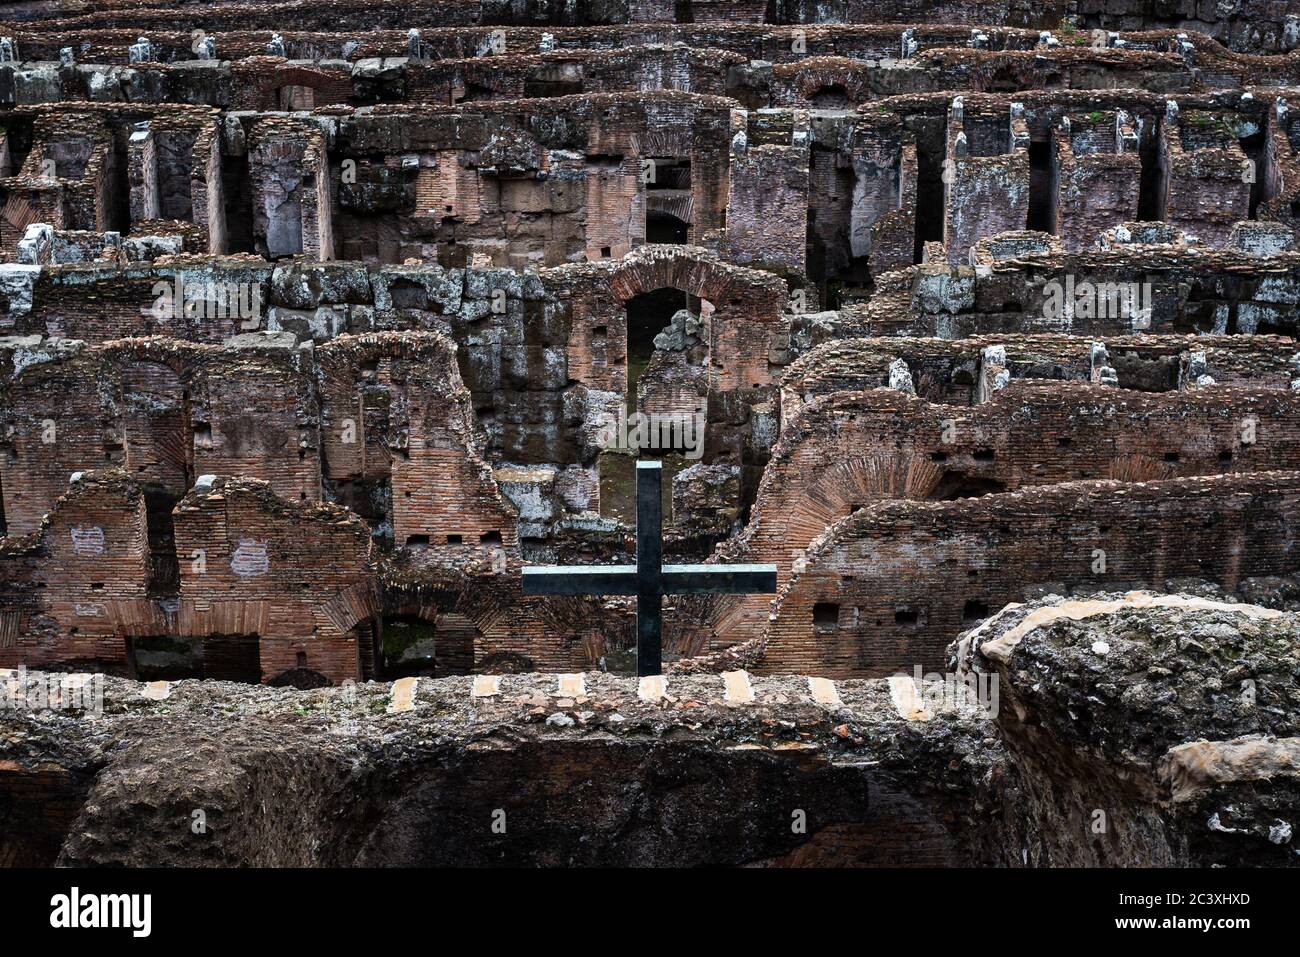 Galleries under the central arena of the Colosseum in Rome, Italy Stock Photo